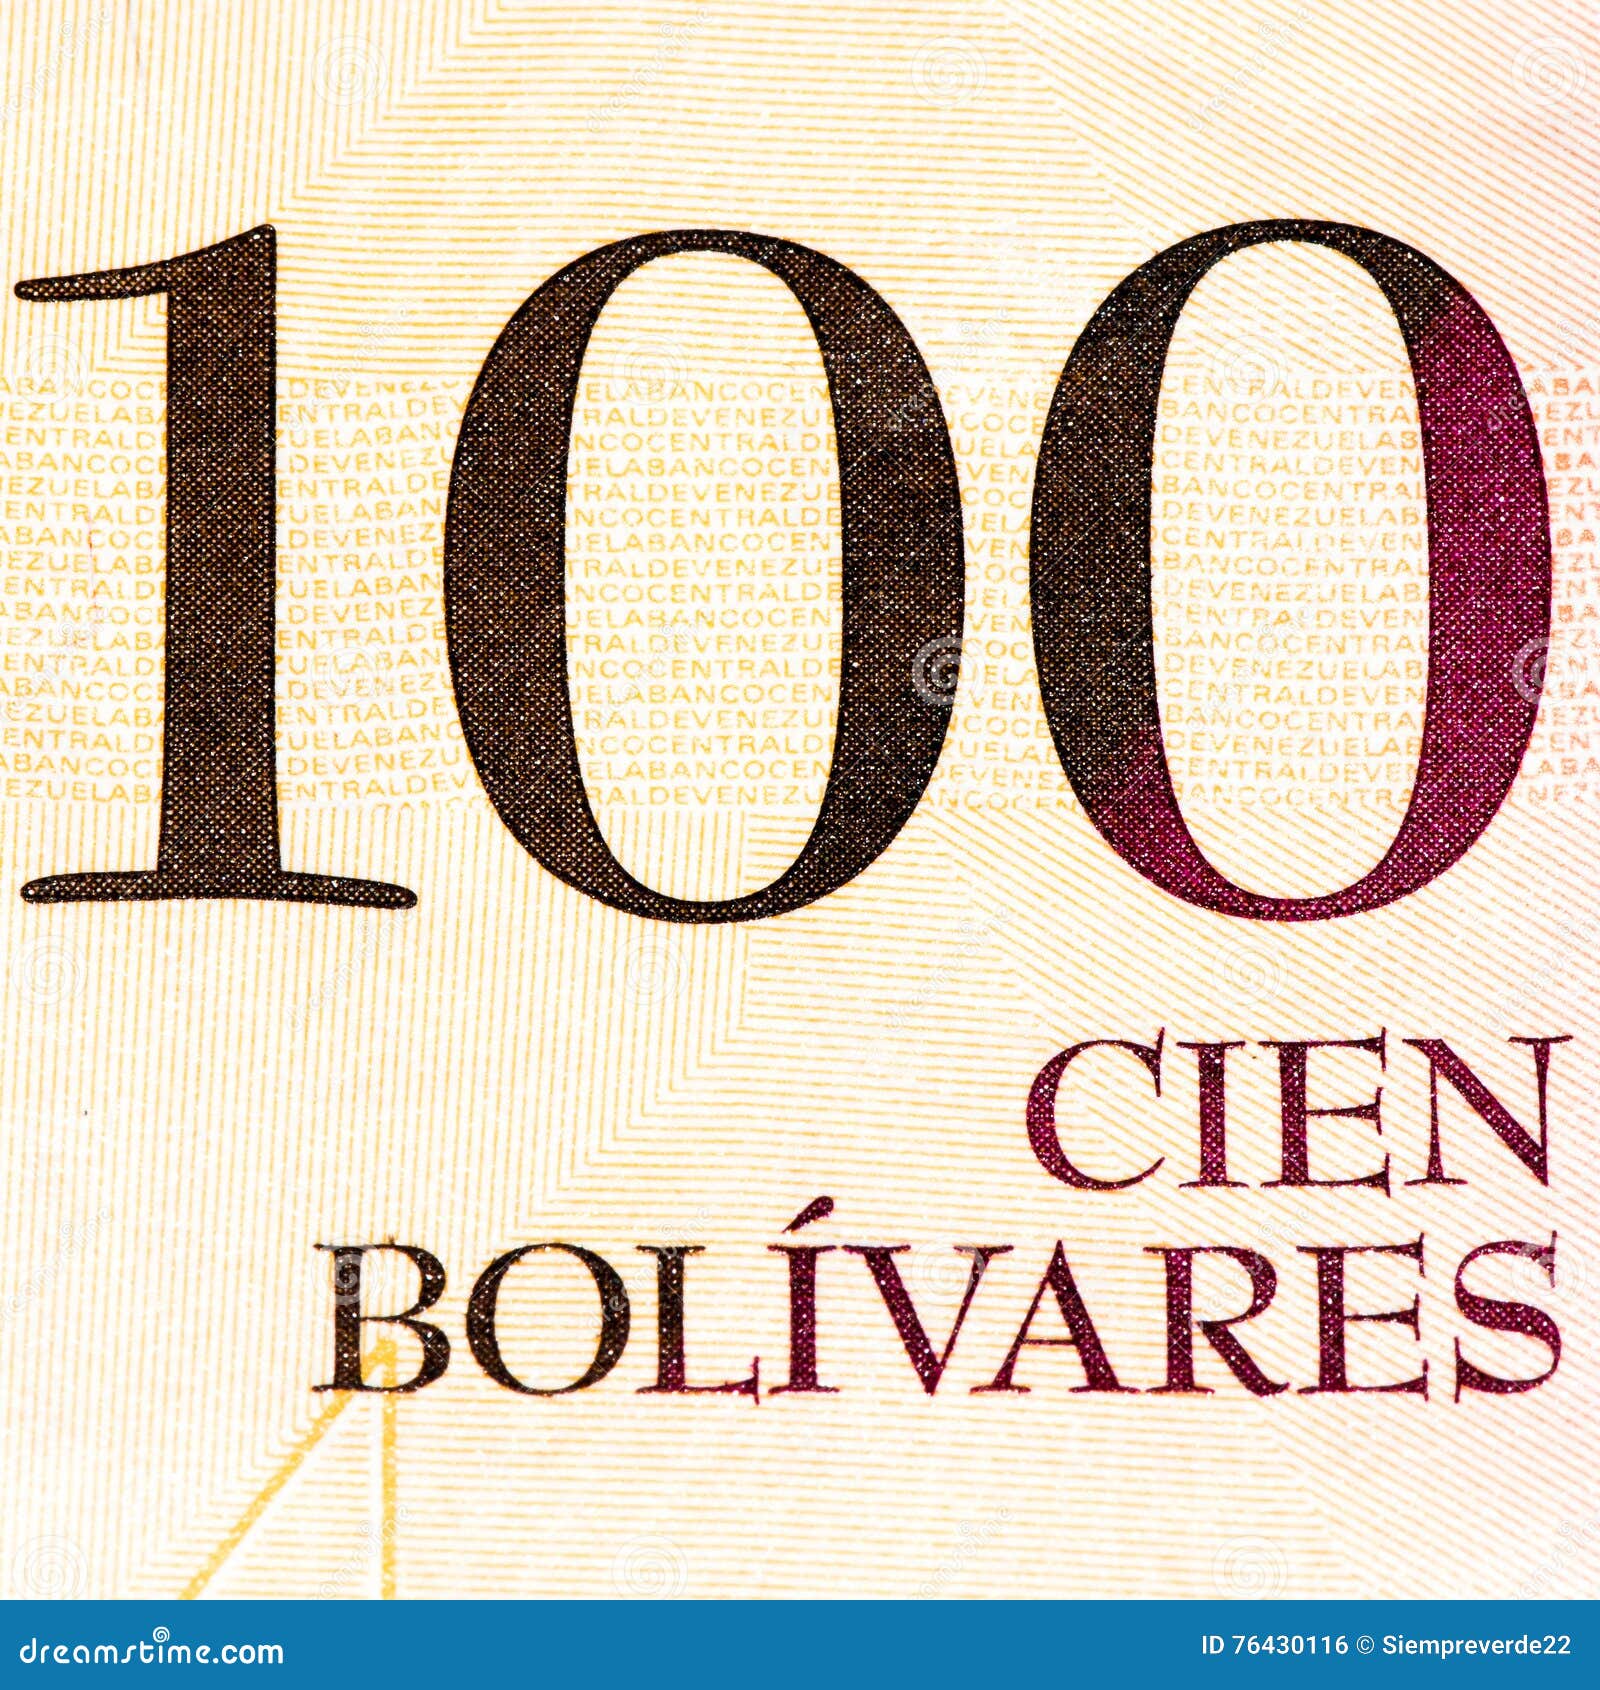 south america currancy banknote